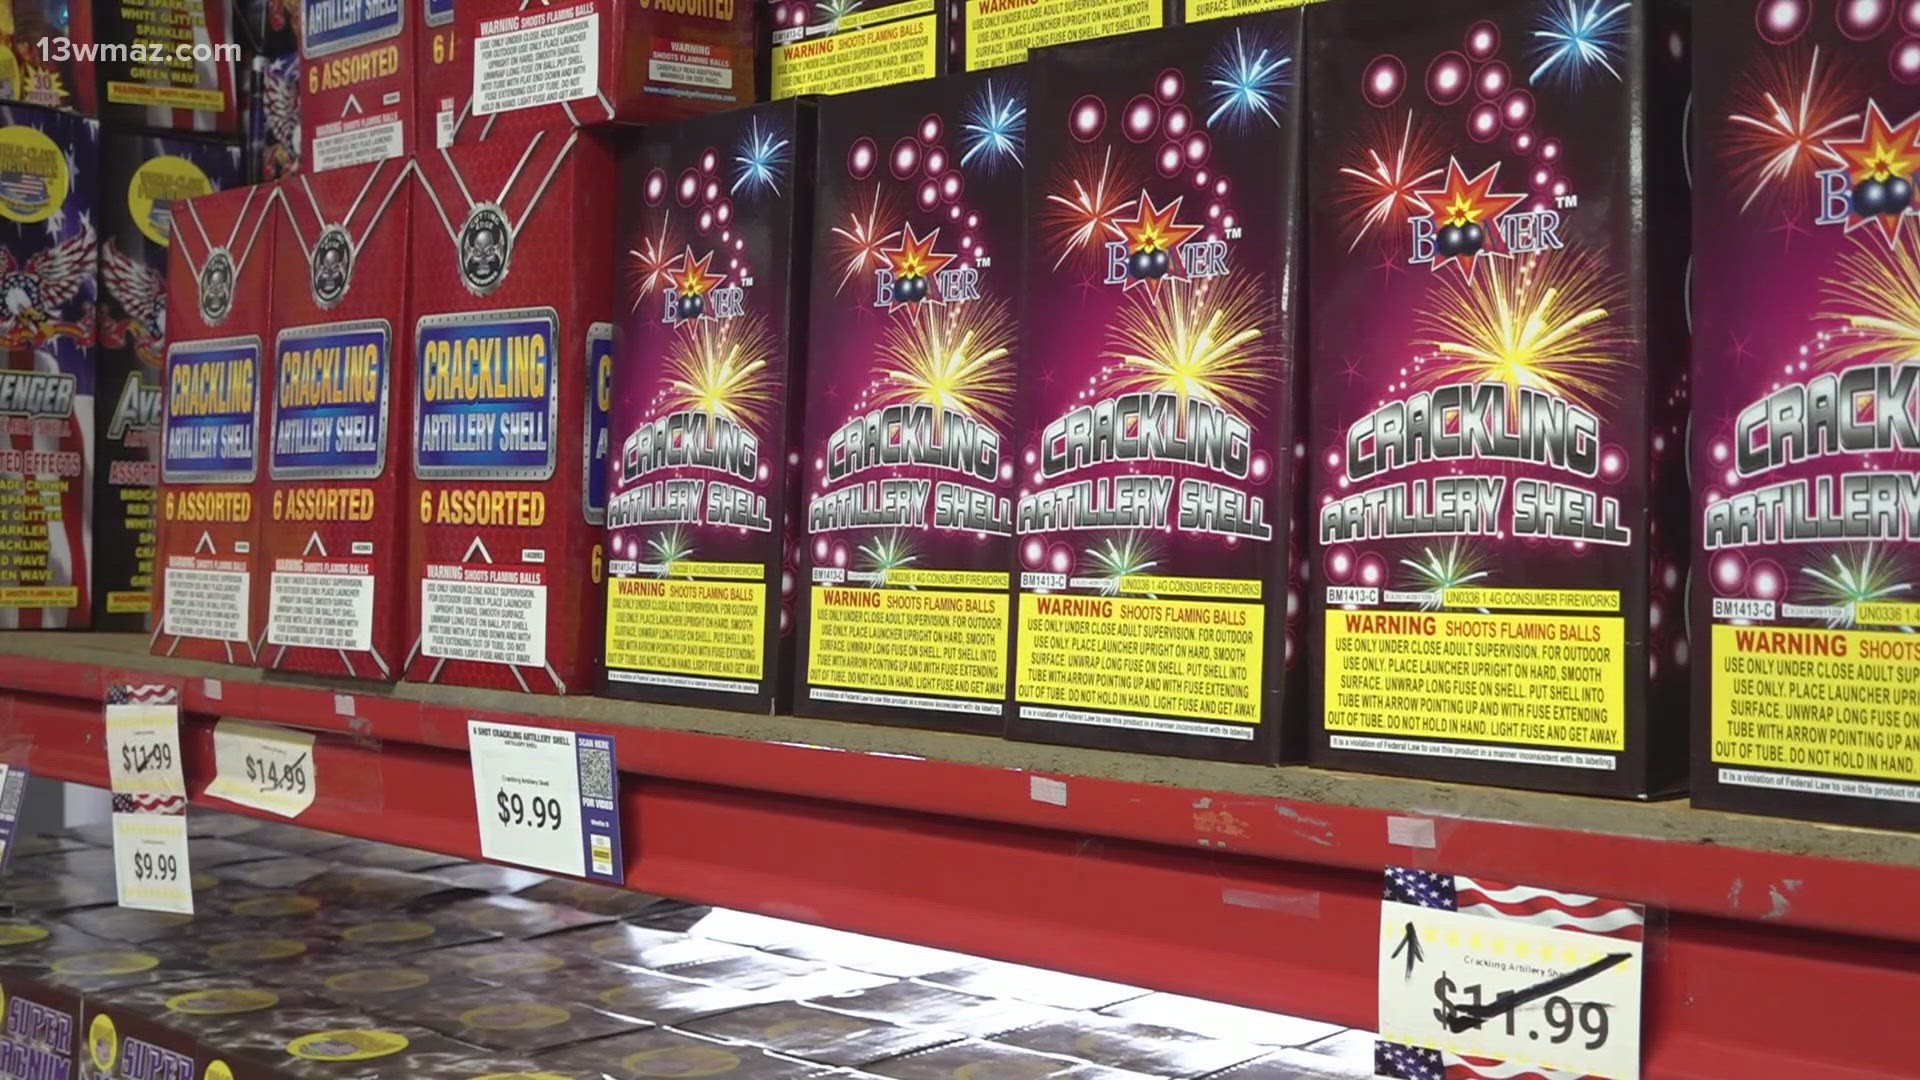 Jennifer Steward at Jake's Fireworks says they are prepared to educate folks on fireworks safety.